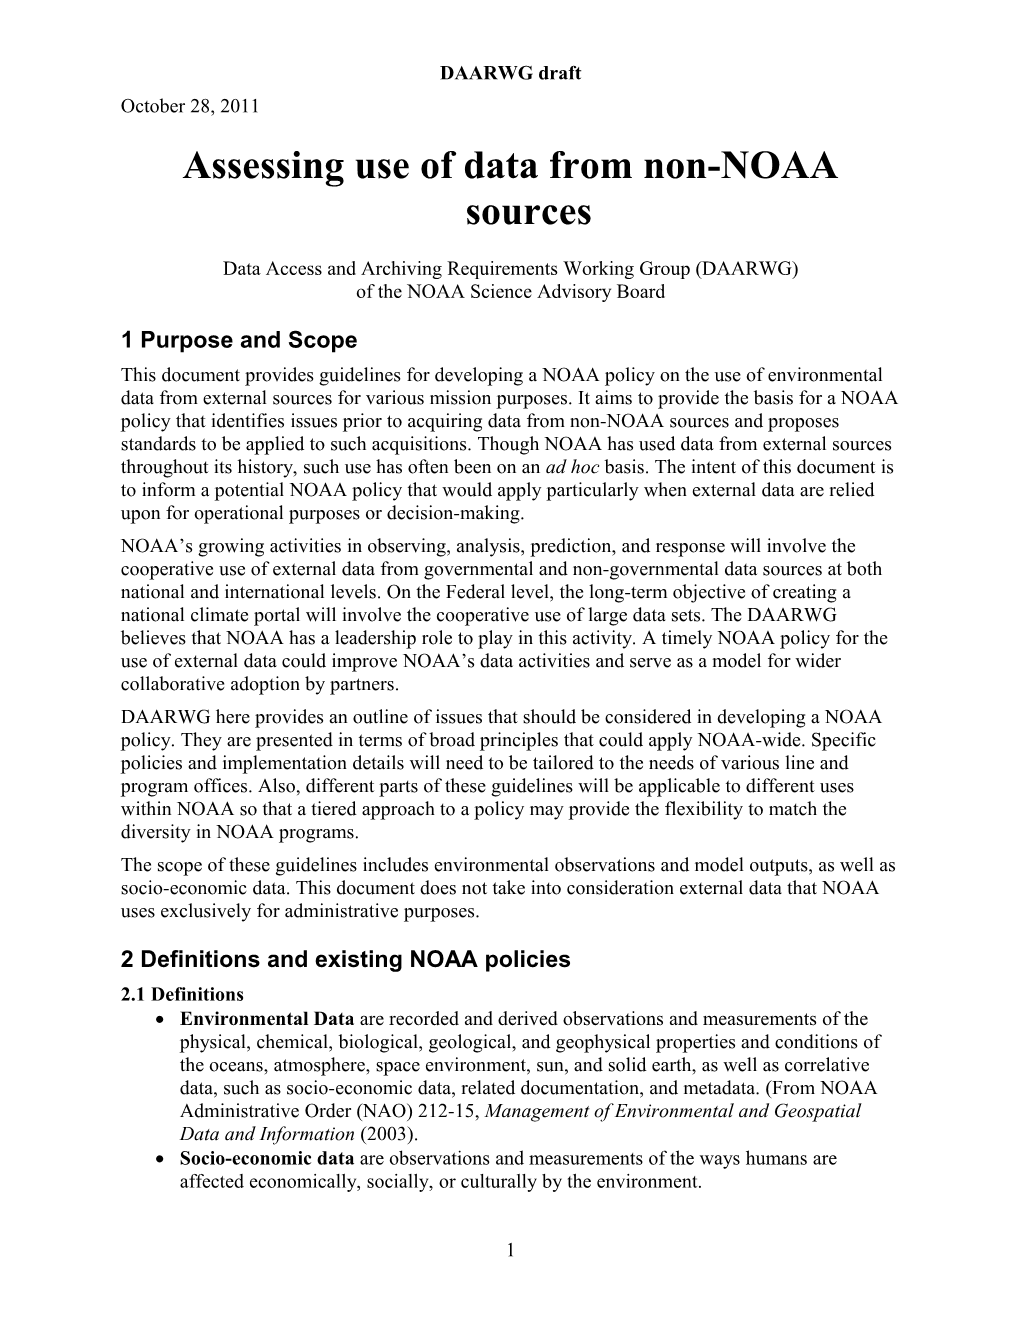 Assessing Use of Data from Non-NOAA Sources